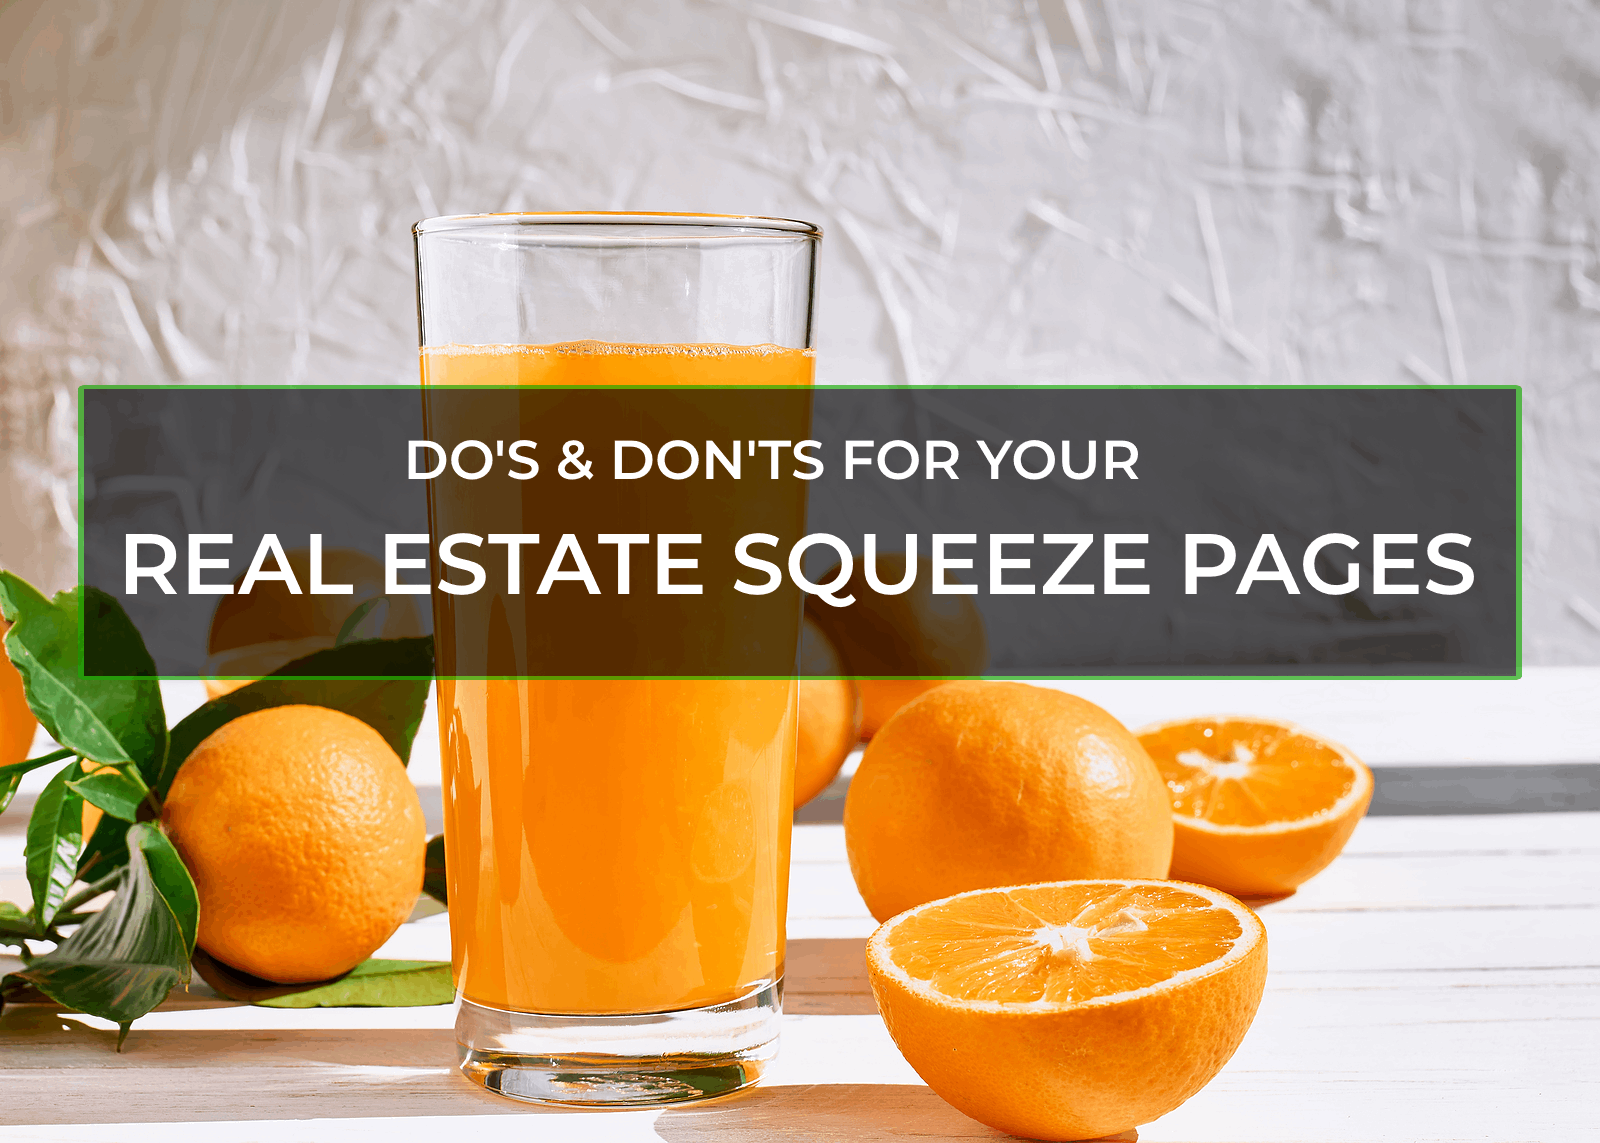 KEY FACTORS FOR YOUR REAL ESTATE SQUEEZE PAGES